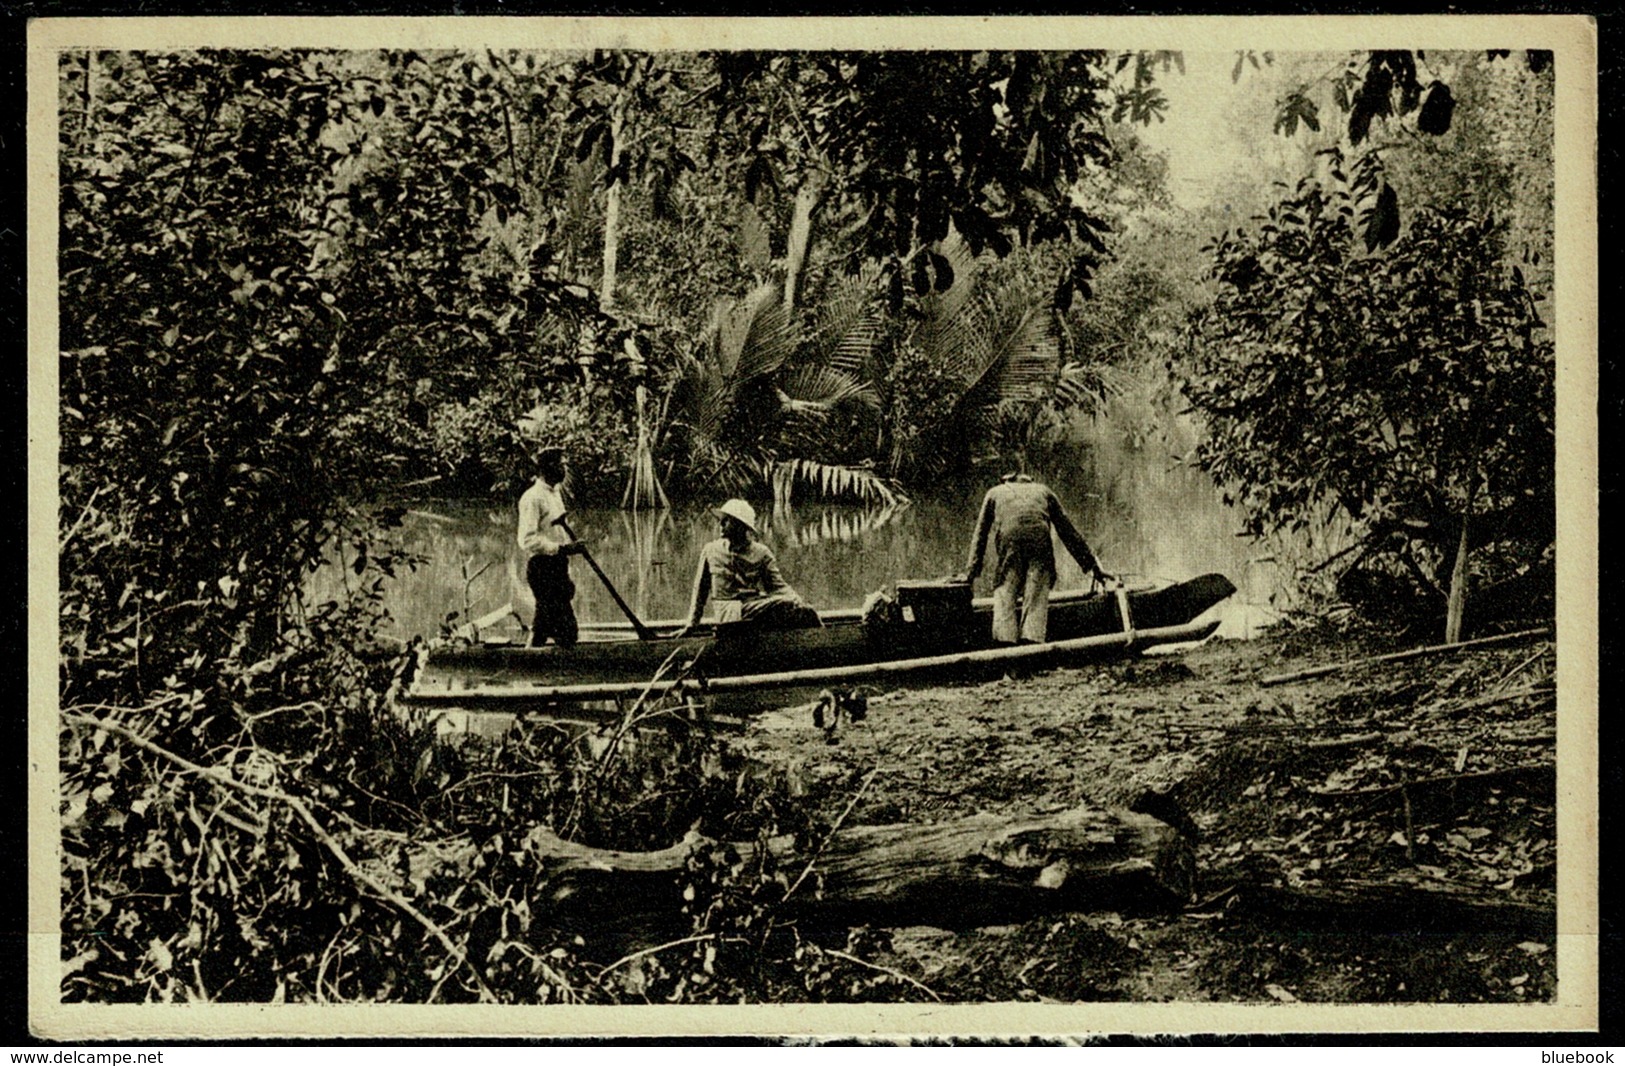 Ref 1289 - Early Ethnic Postcard - Missionary On Tour By Canoe Boat - Indonesia - Indonesia